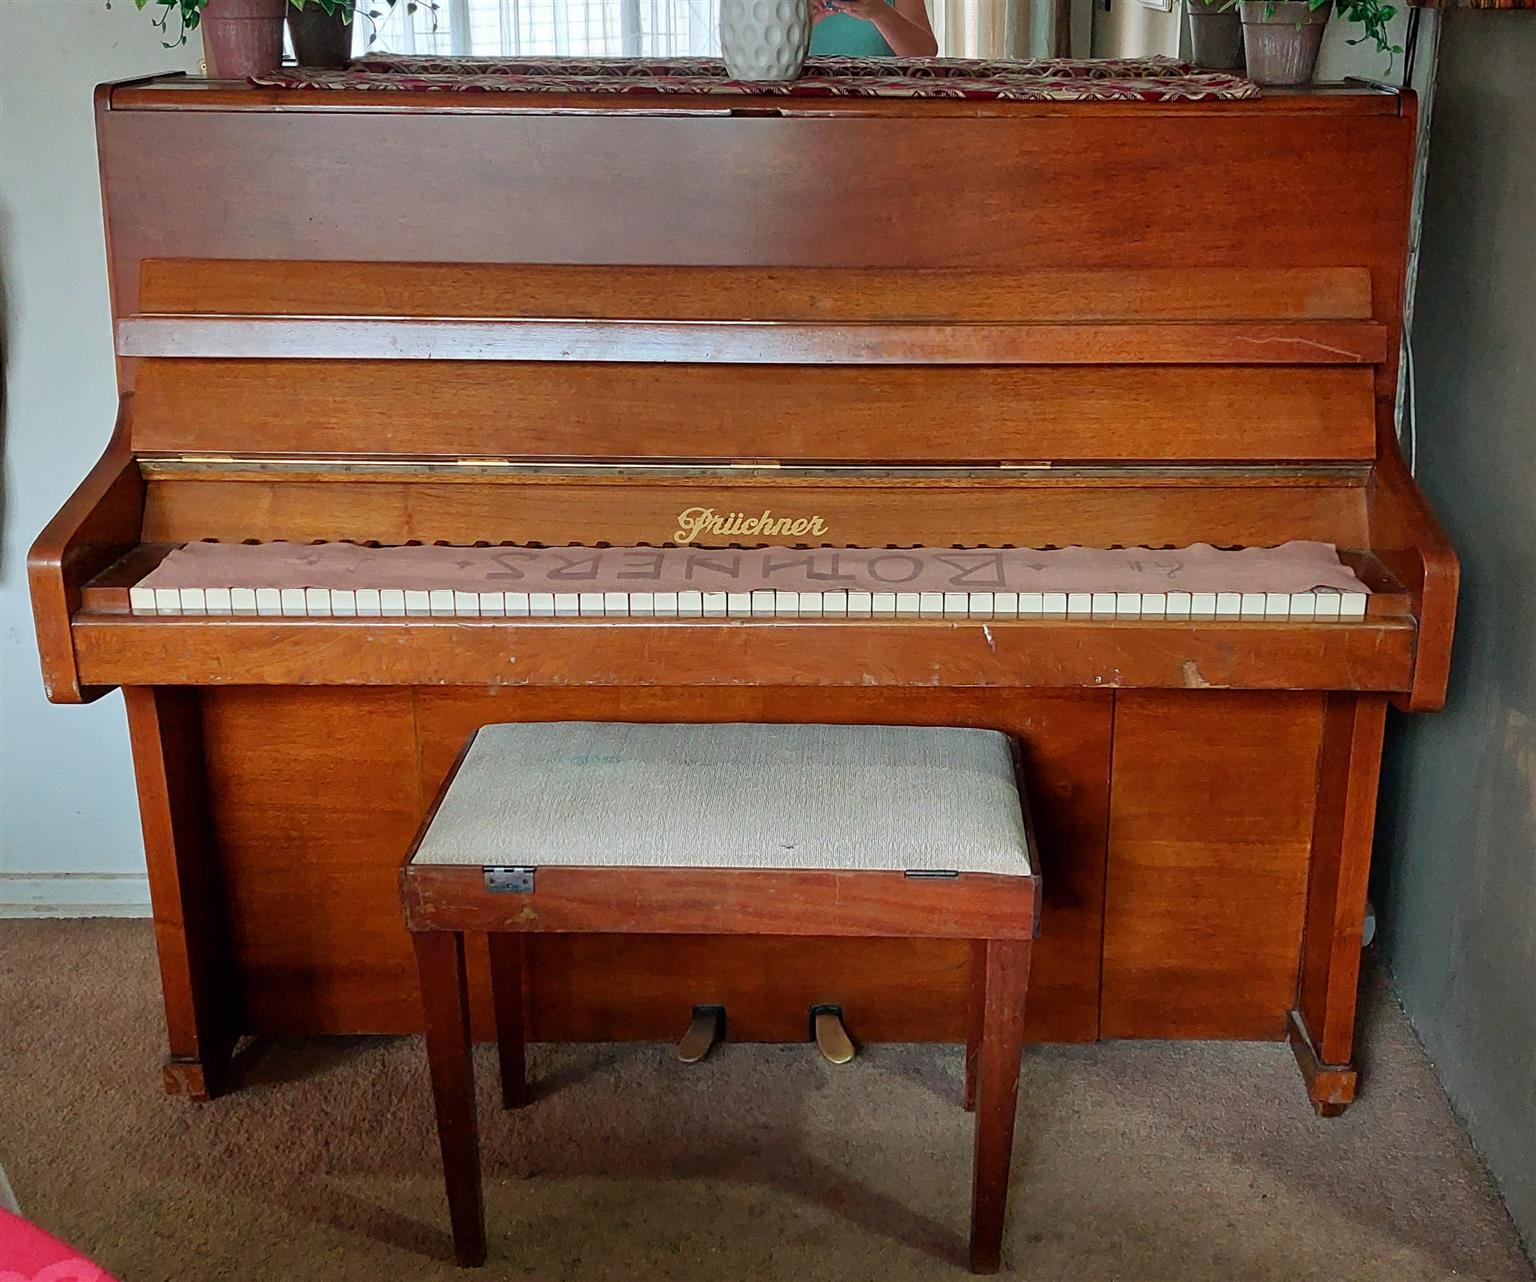 Prüchner 2nd hand piano for sale